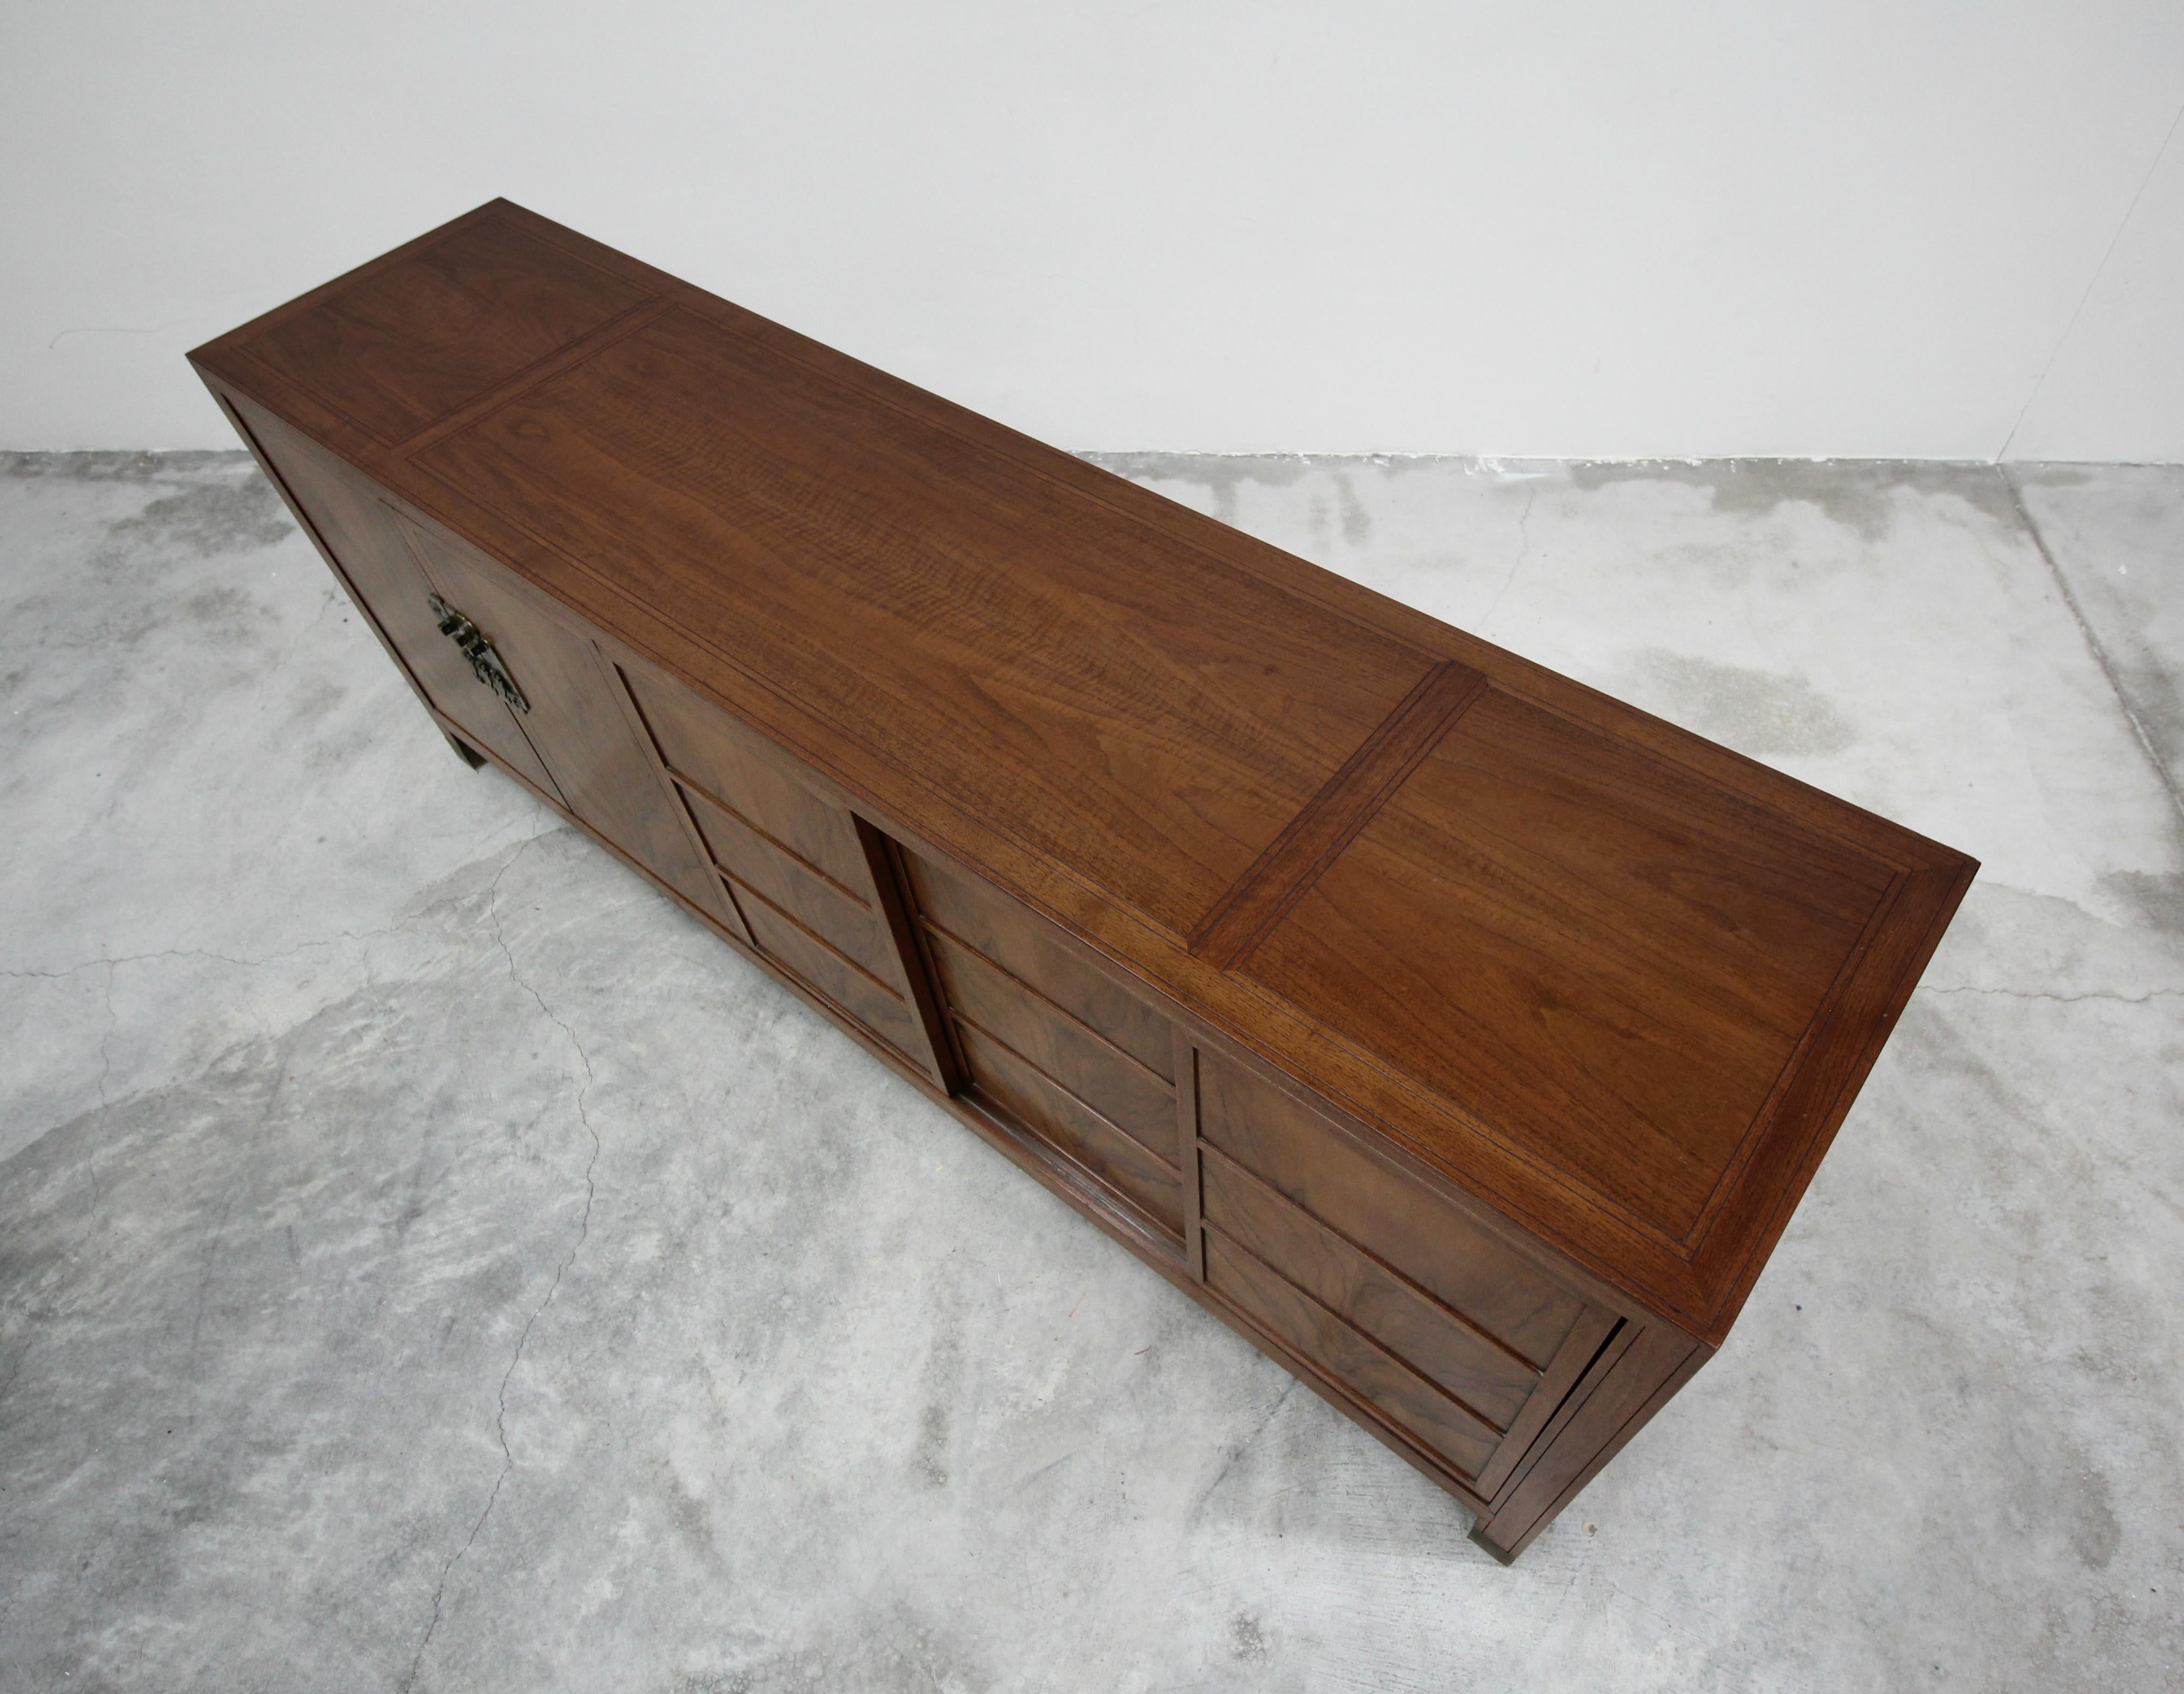 20th Century Midcentury Walnut Credenza by Frank Van Steenberg for Baker Far East Collection